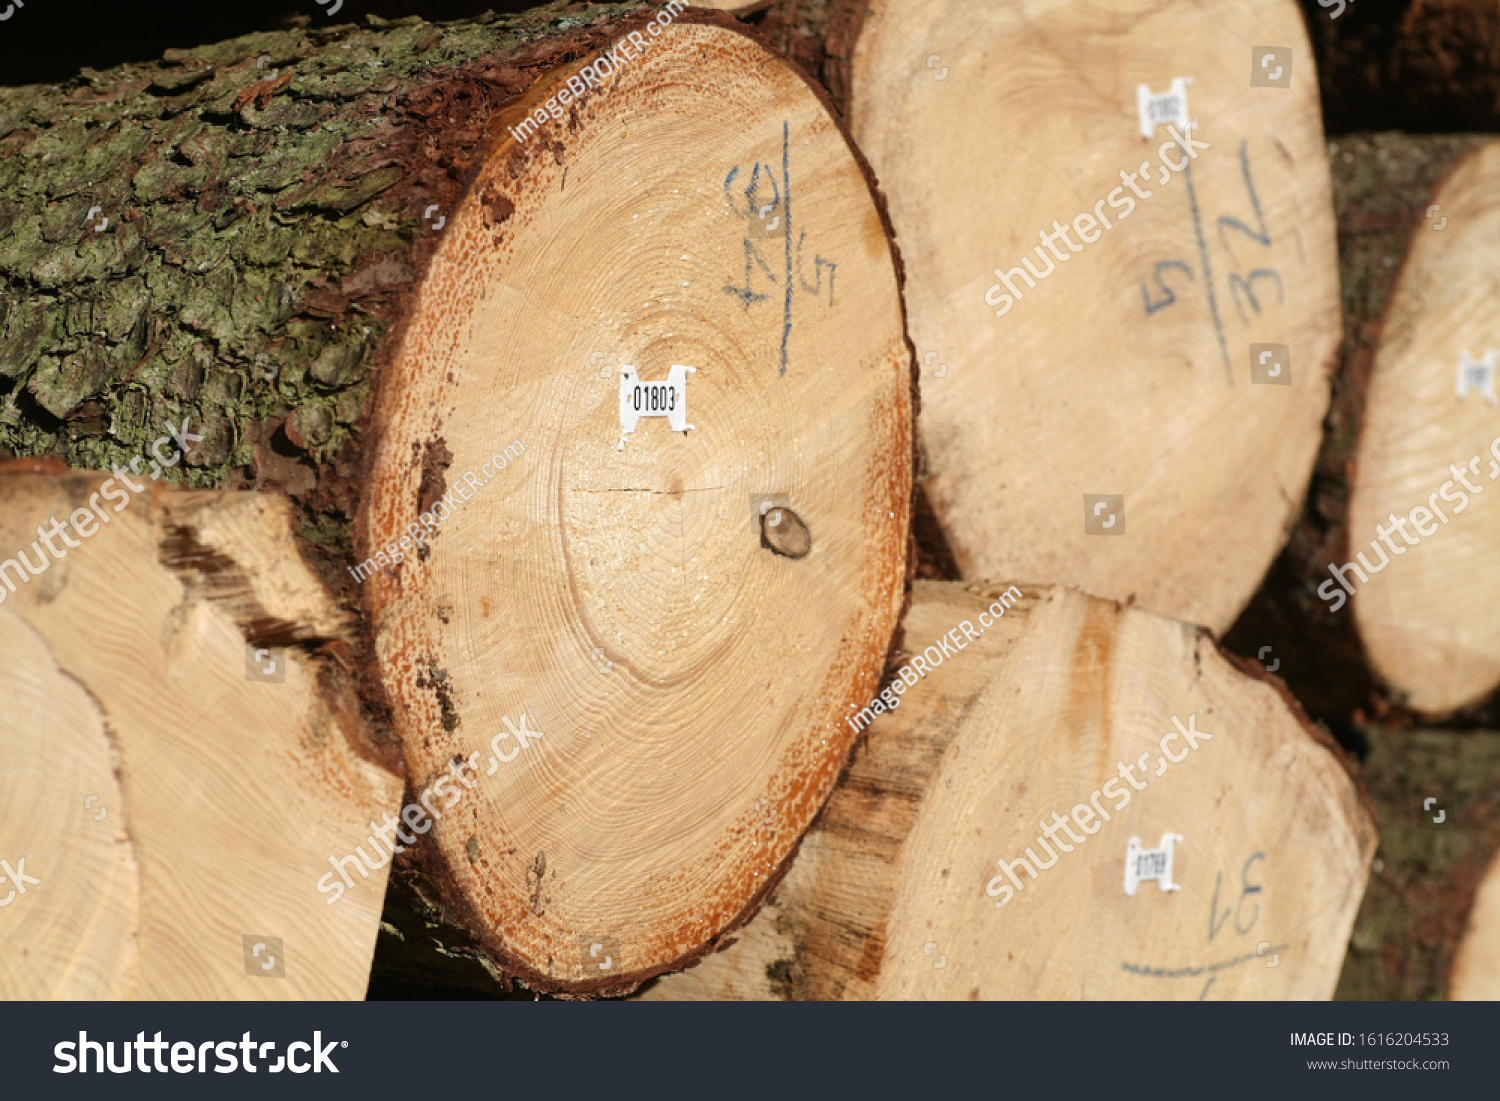 Tree logs are piled up, numbered, labeled and ready for transport #1616204533